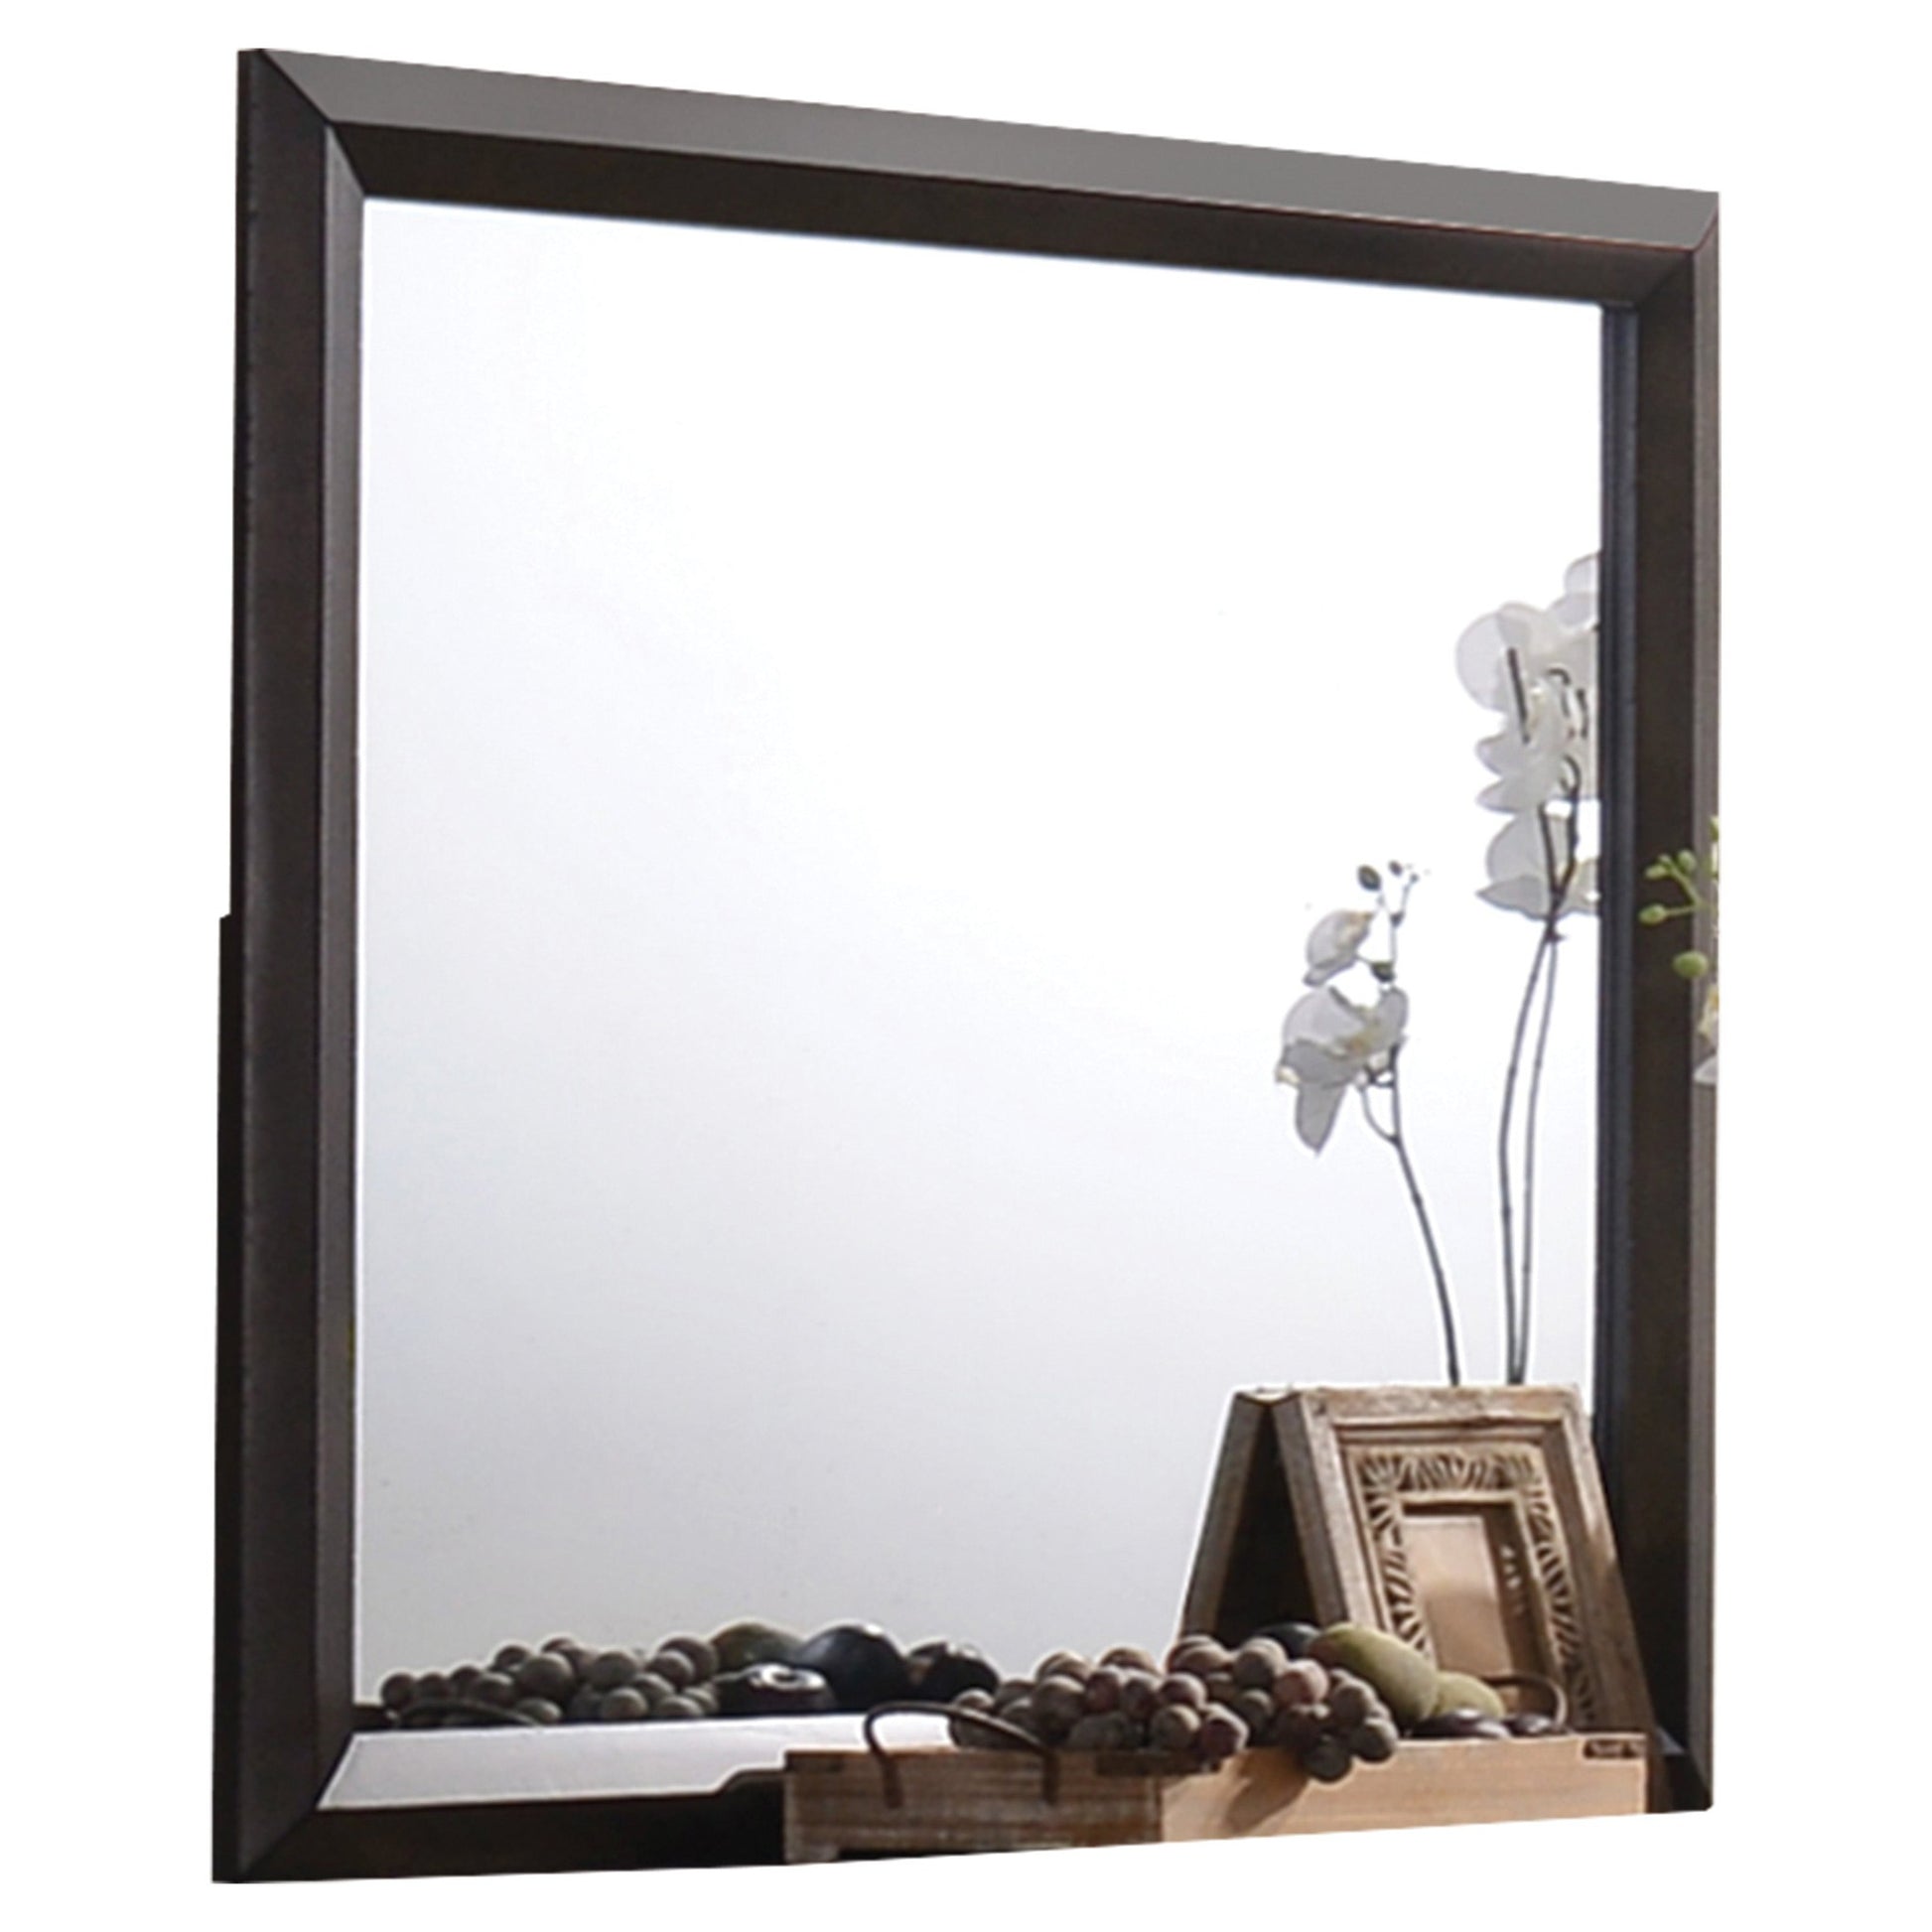 Benzara Brown and Silver Transition Style Wooden Mirror With Rectangular Shape